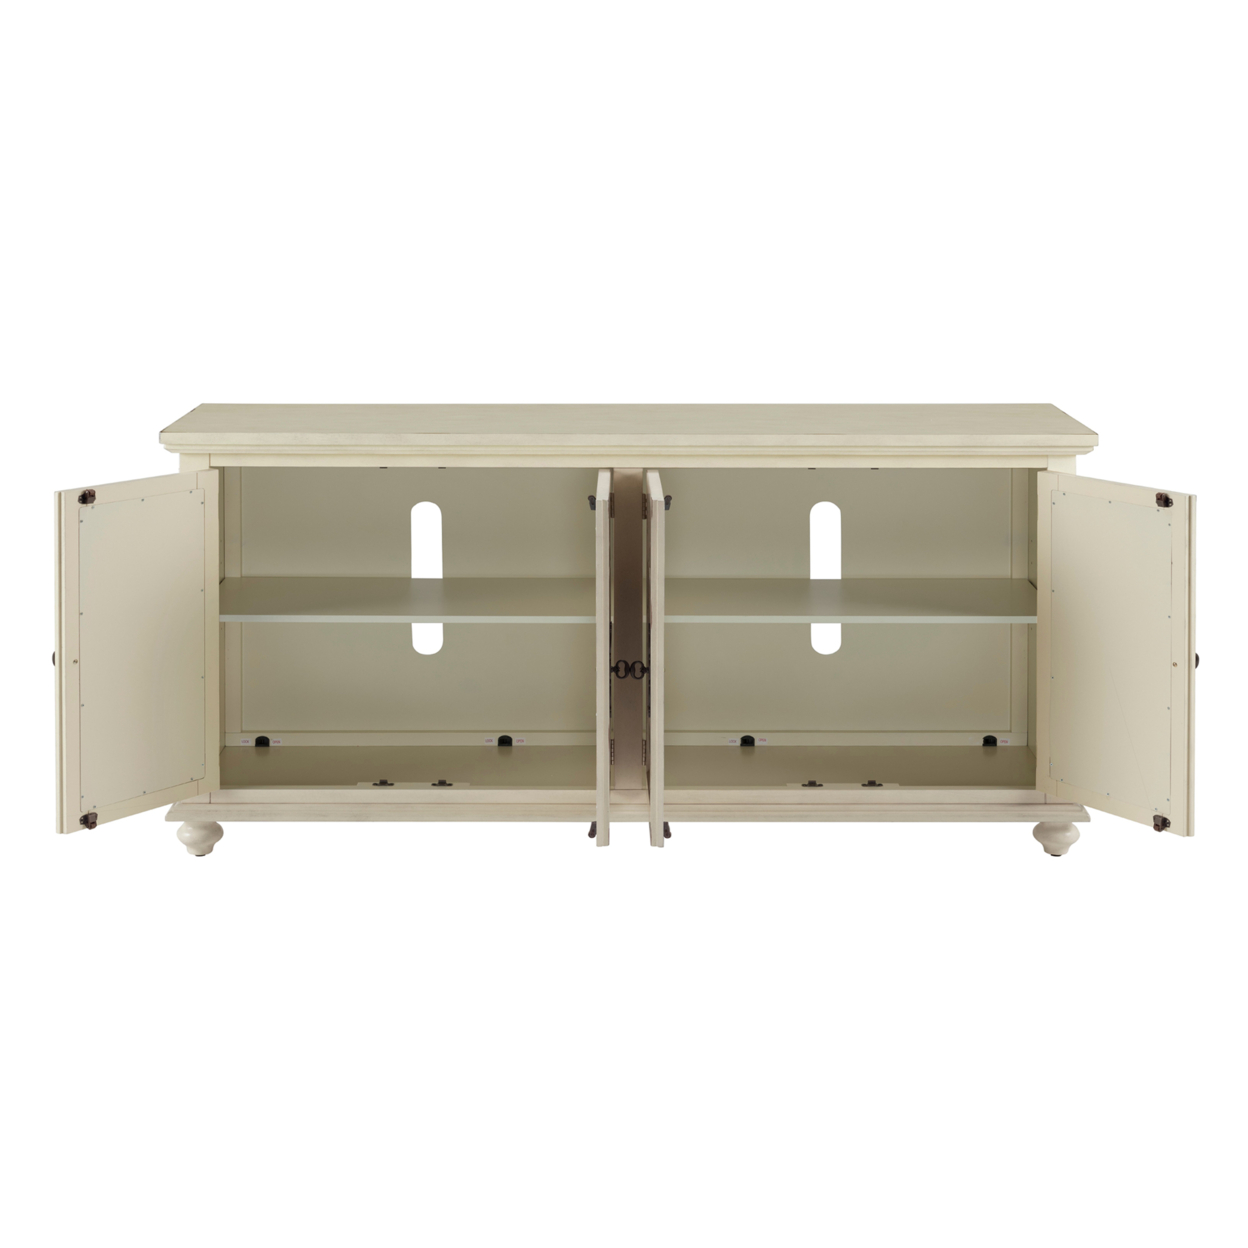 Trellis Front Wood And Glass TV Stand With Cabinet Storage, Beige- Saltoro Sherpi